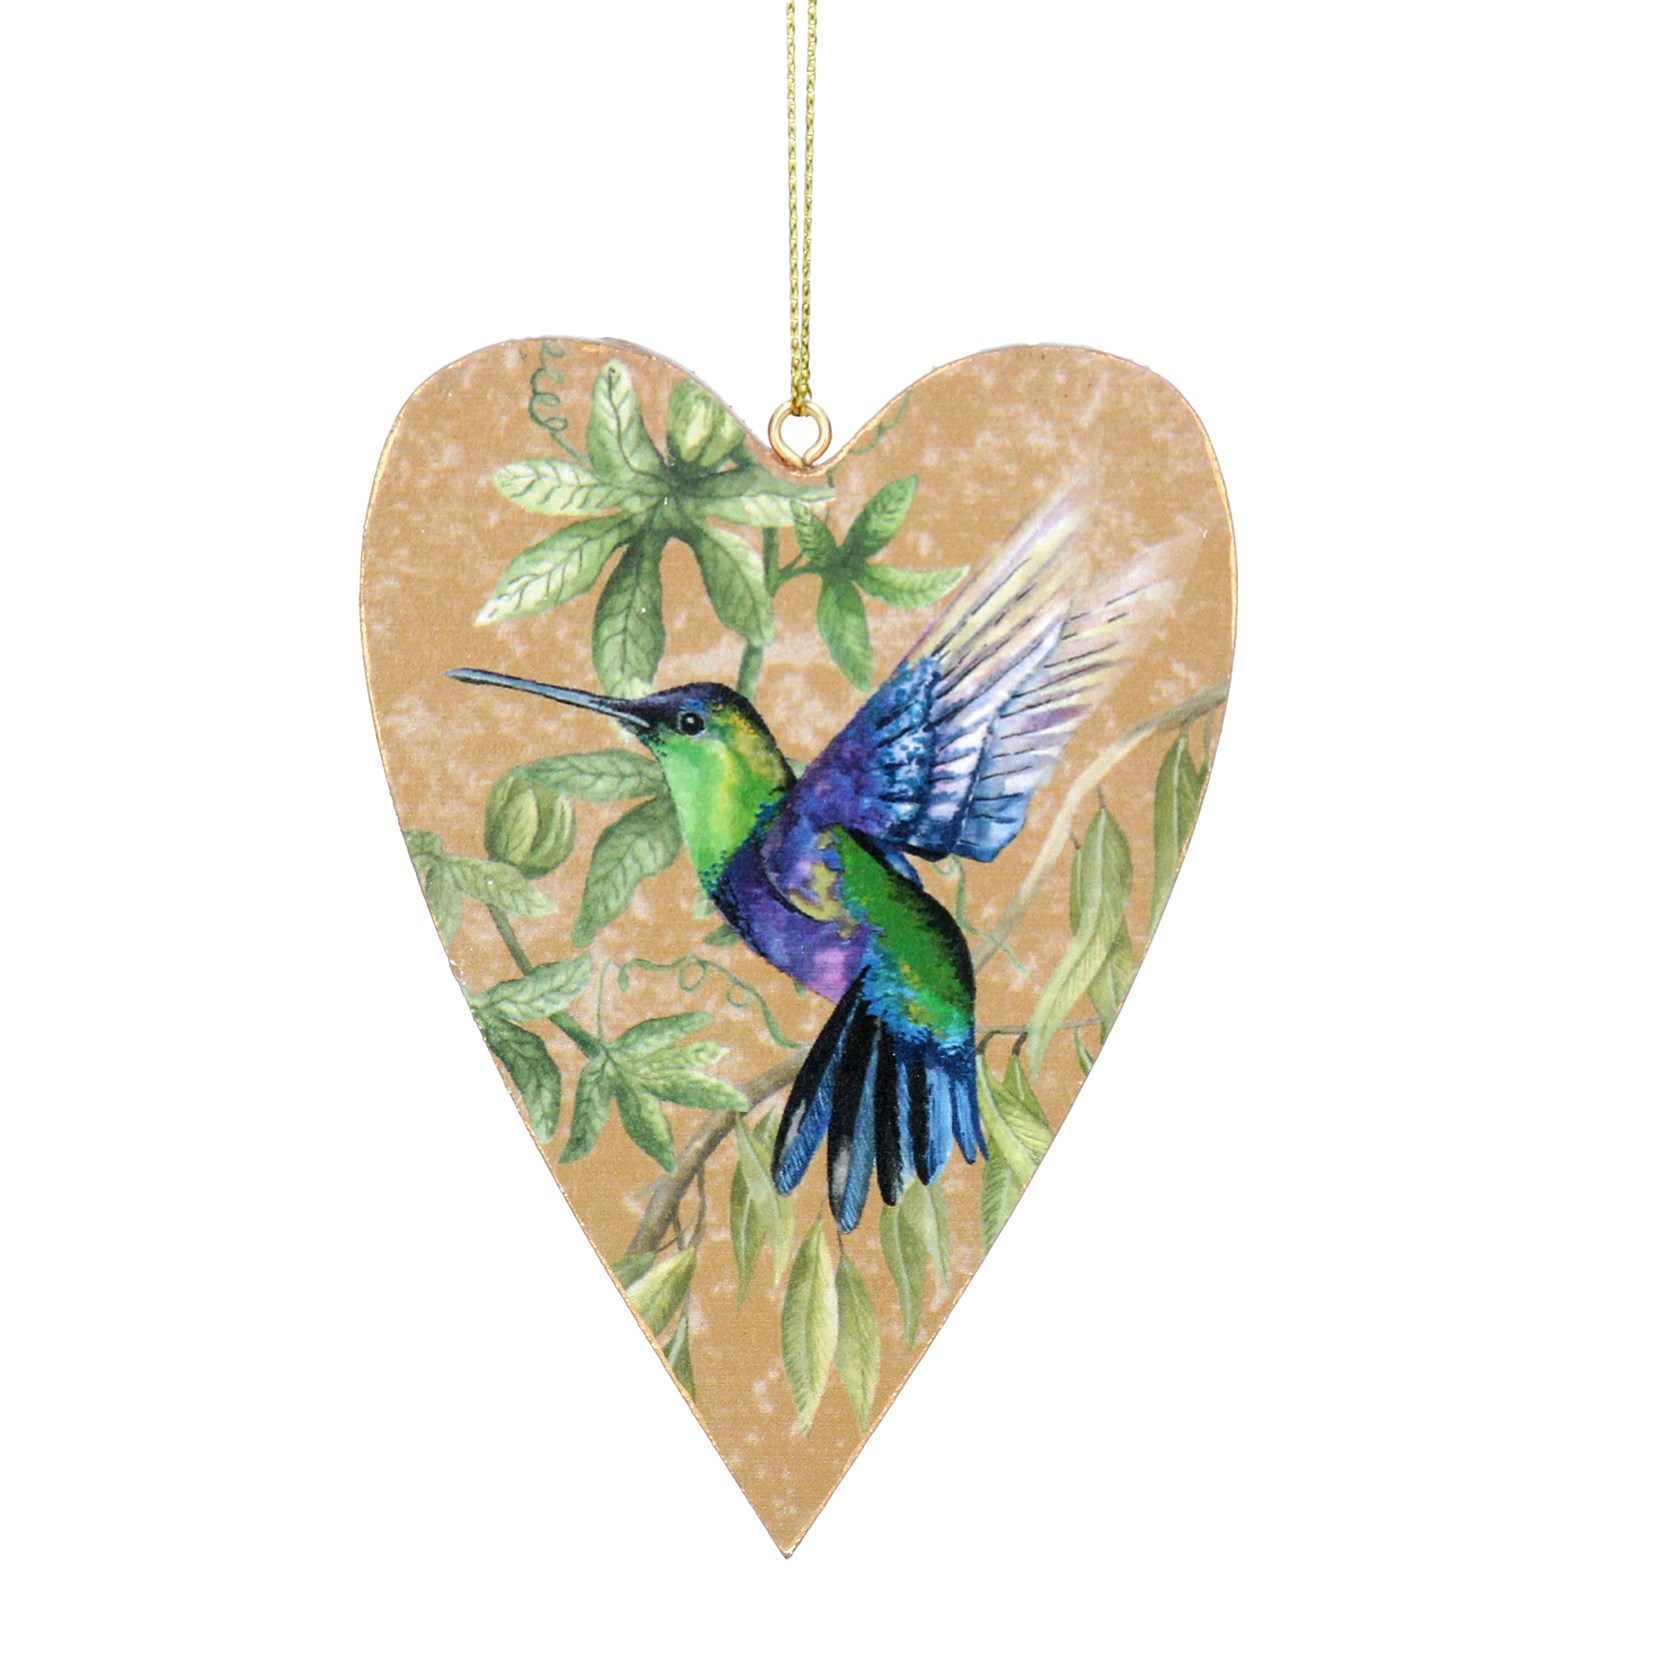 Natural wooden heart hanging decoration with Hummingbird and leaves design. By Gisela Graham.